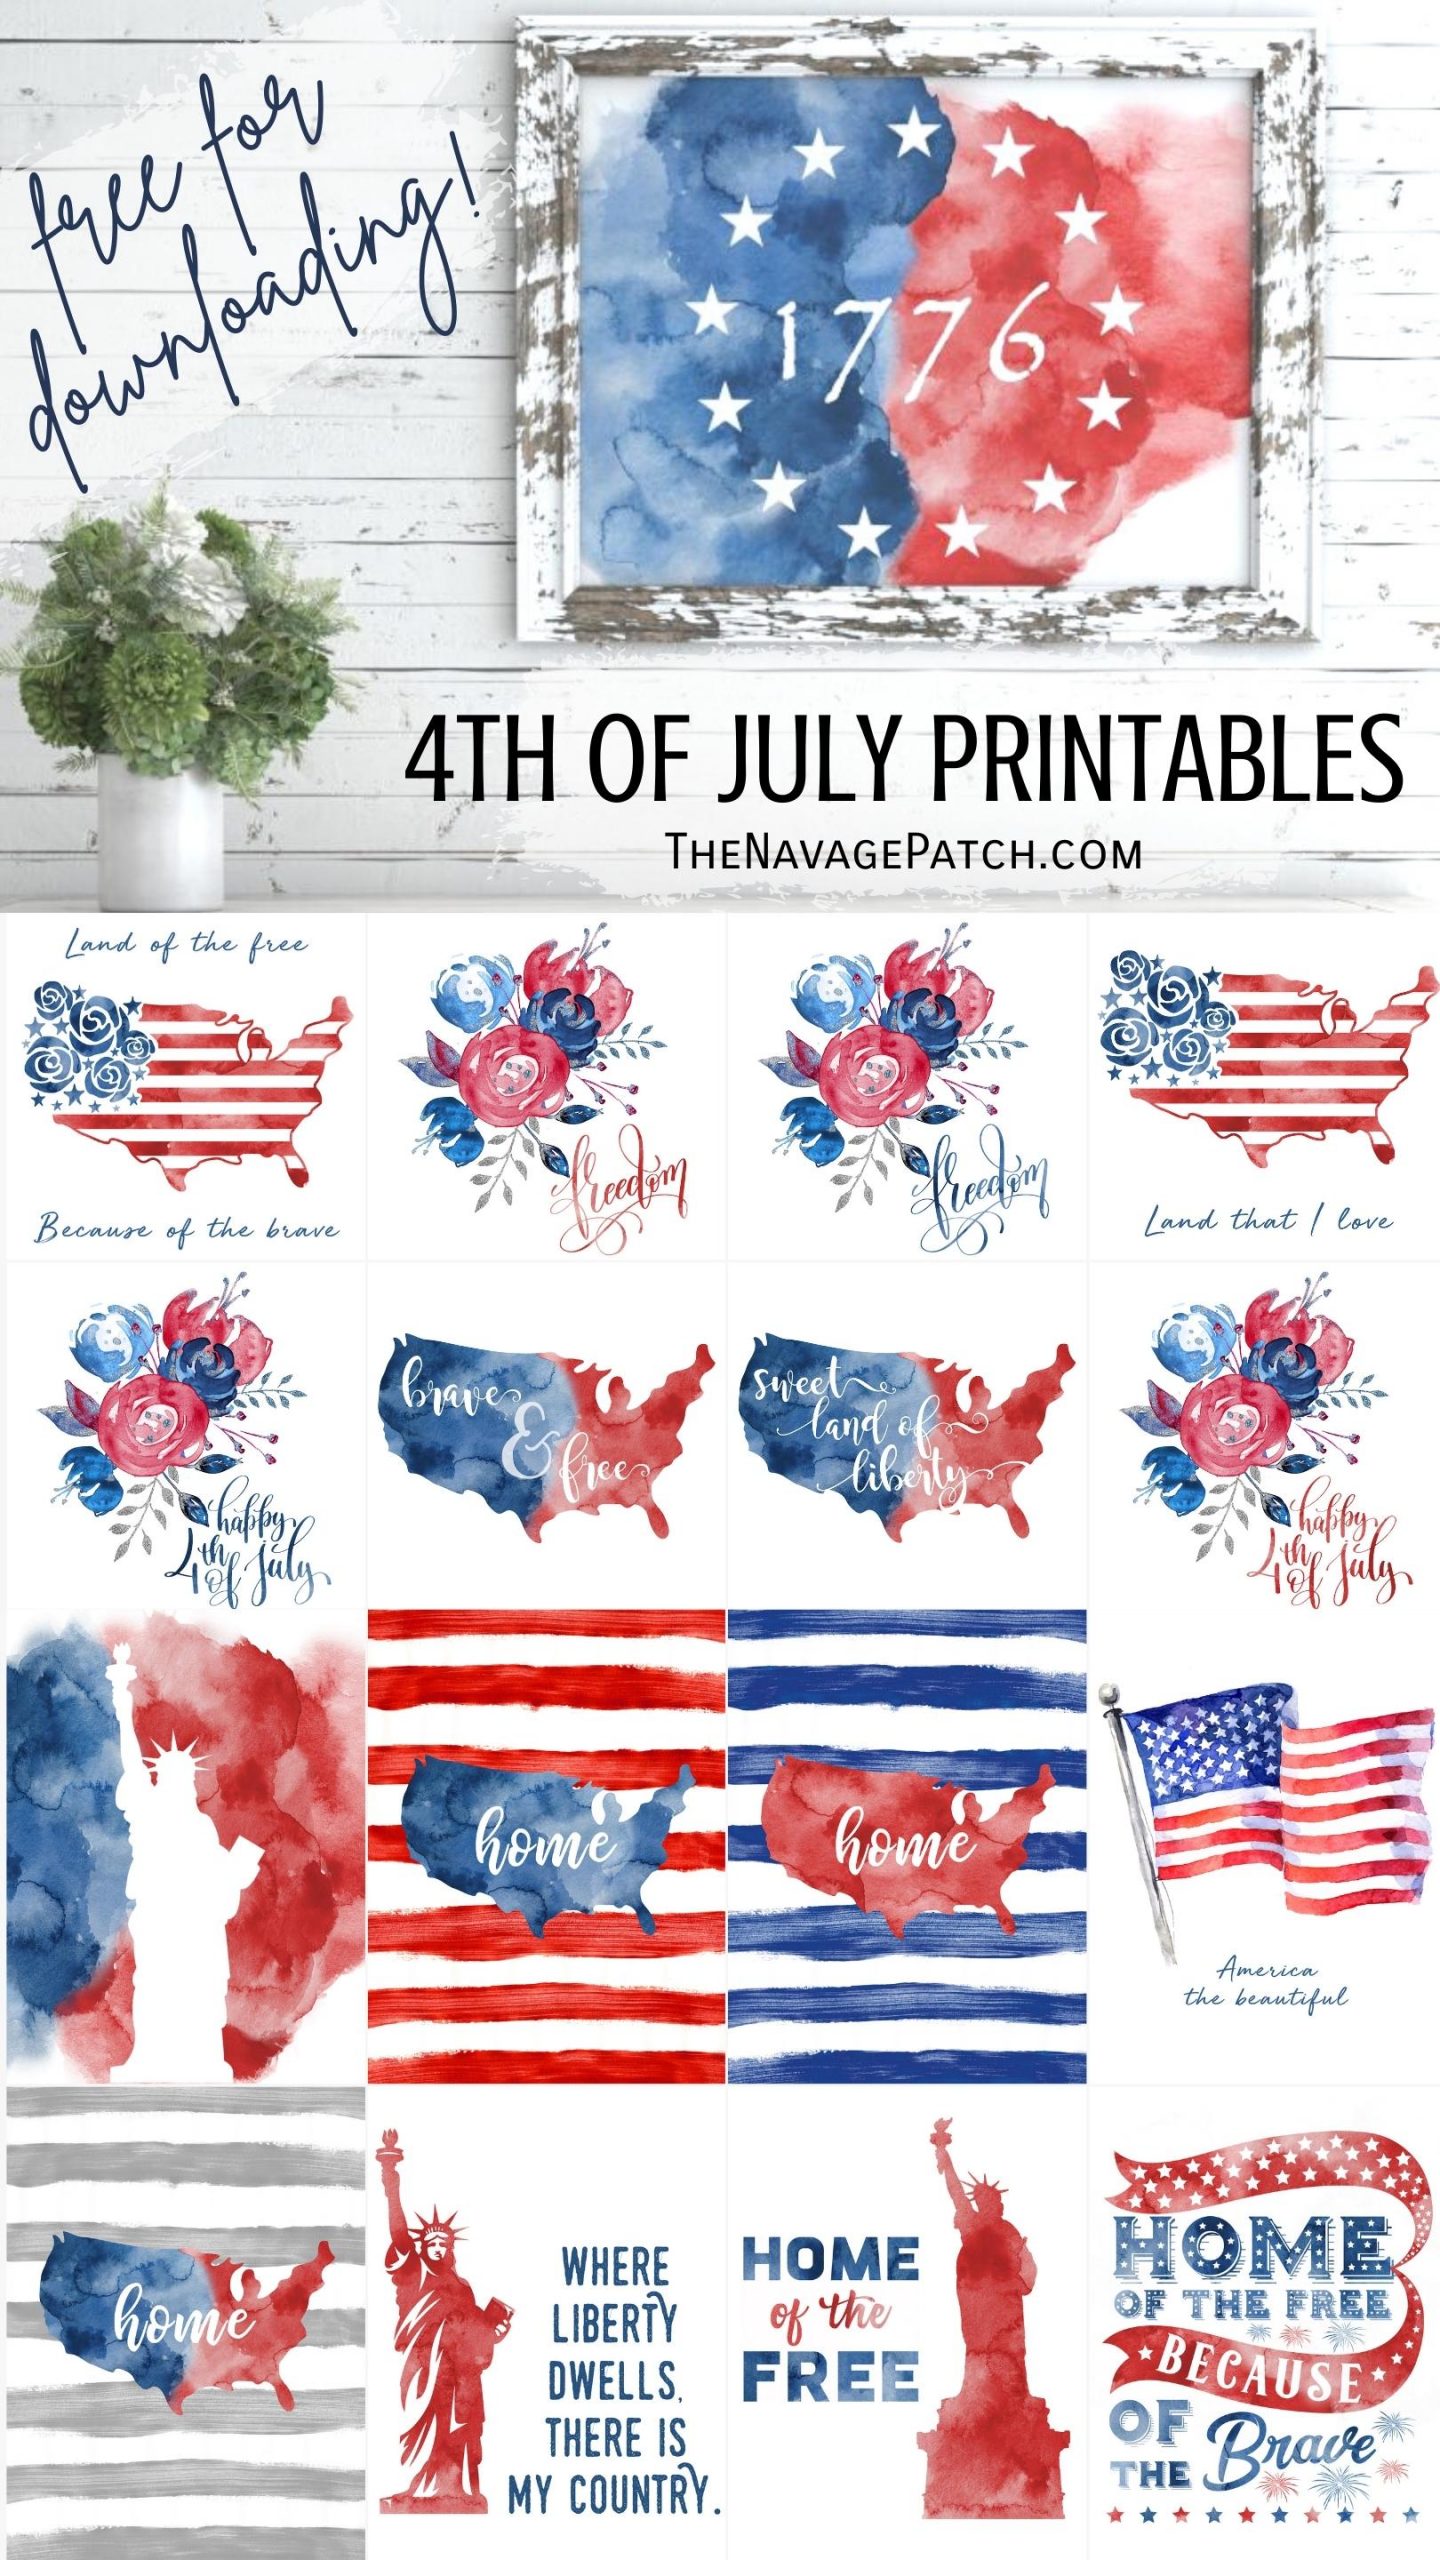 Free Watercolor Fourth of July Printables - TheNavagePatch.com